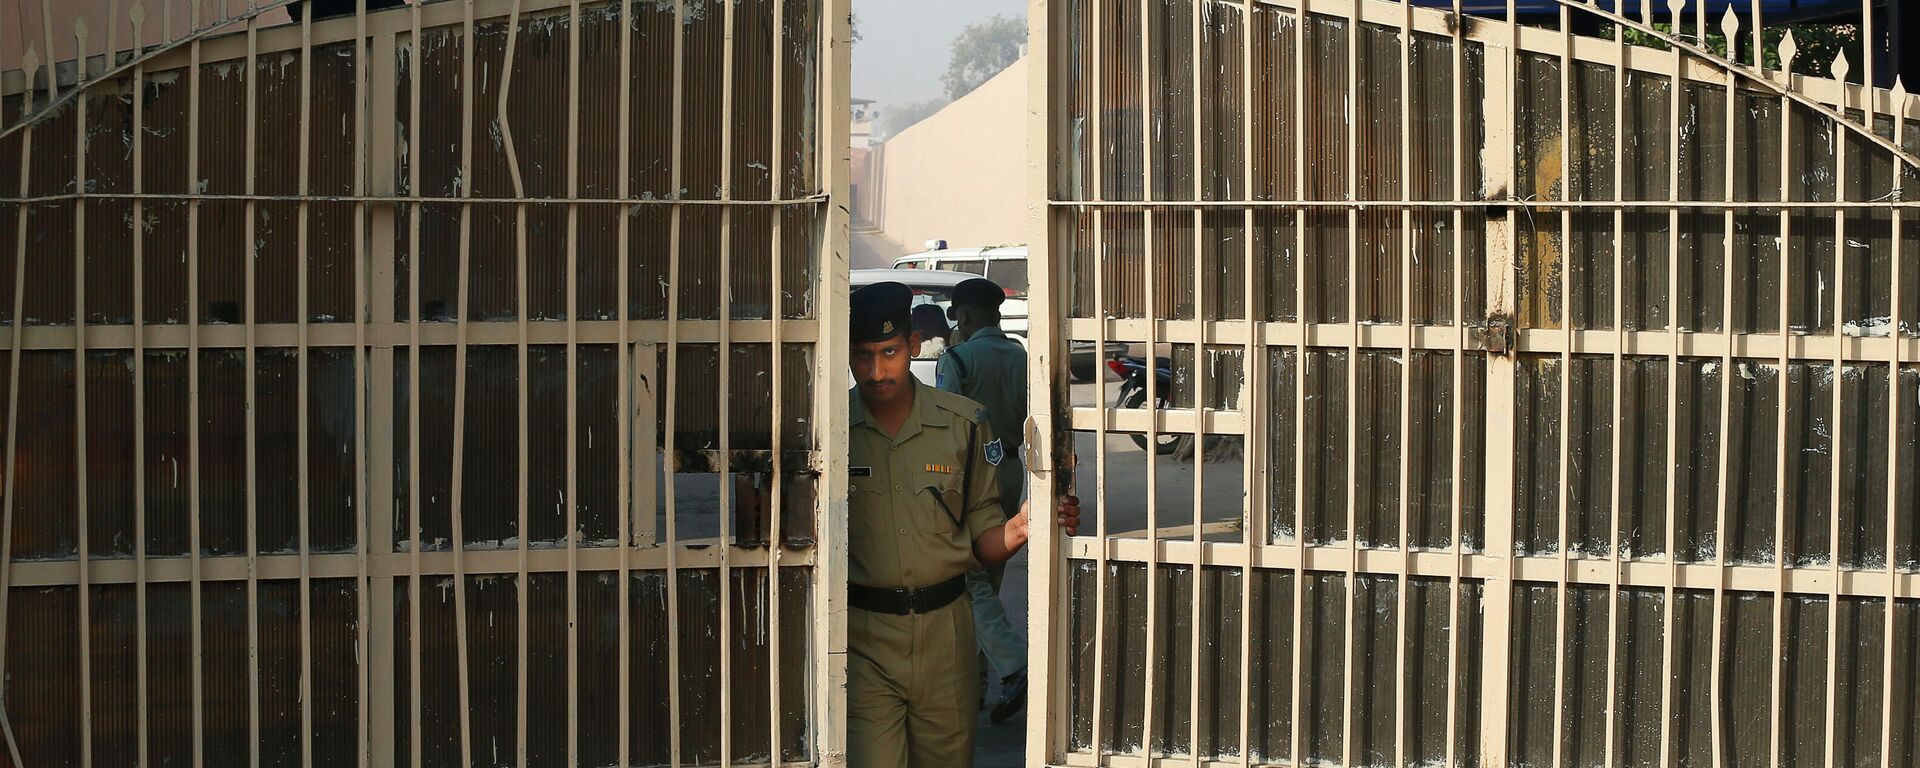 An Indian police officer prepares to close one of the gates at Tihar Jail, the largest complex of prisons in South Asia, in New Delhi, India, Monday, March 11, 2013 - Sputnik International, 1920, 23.11.2022